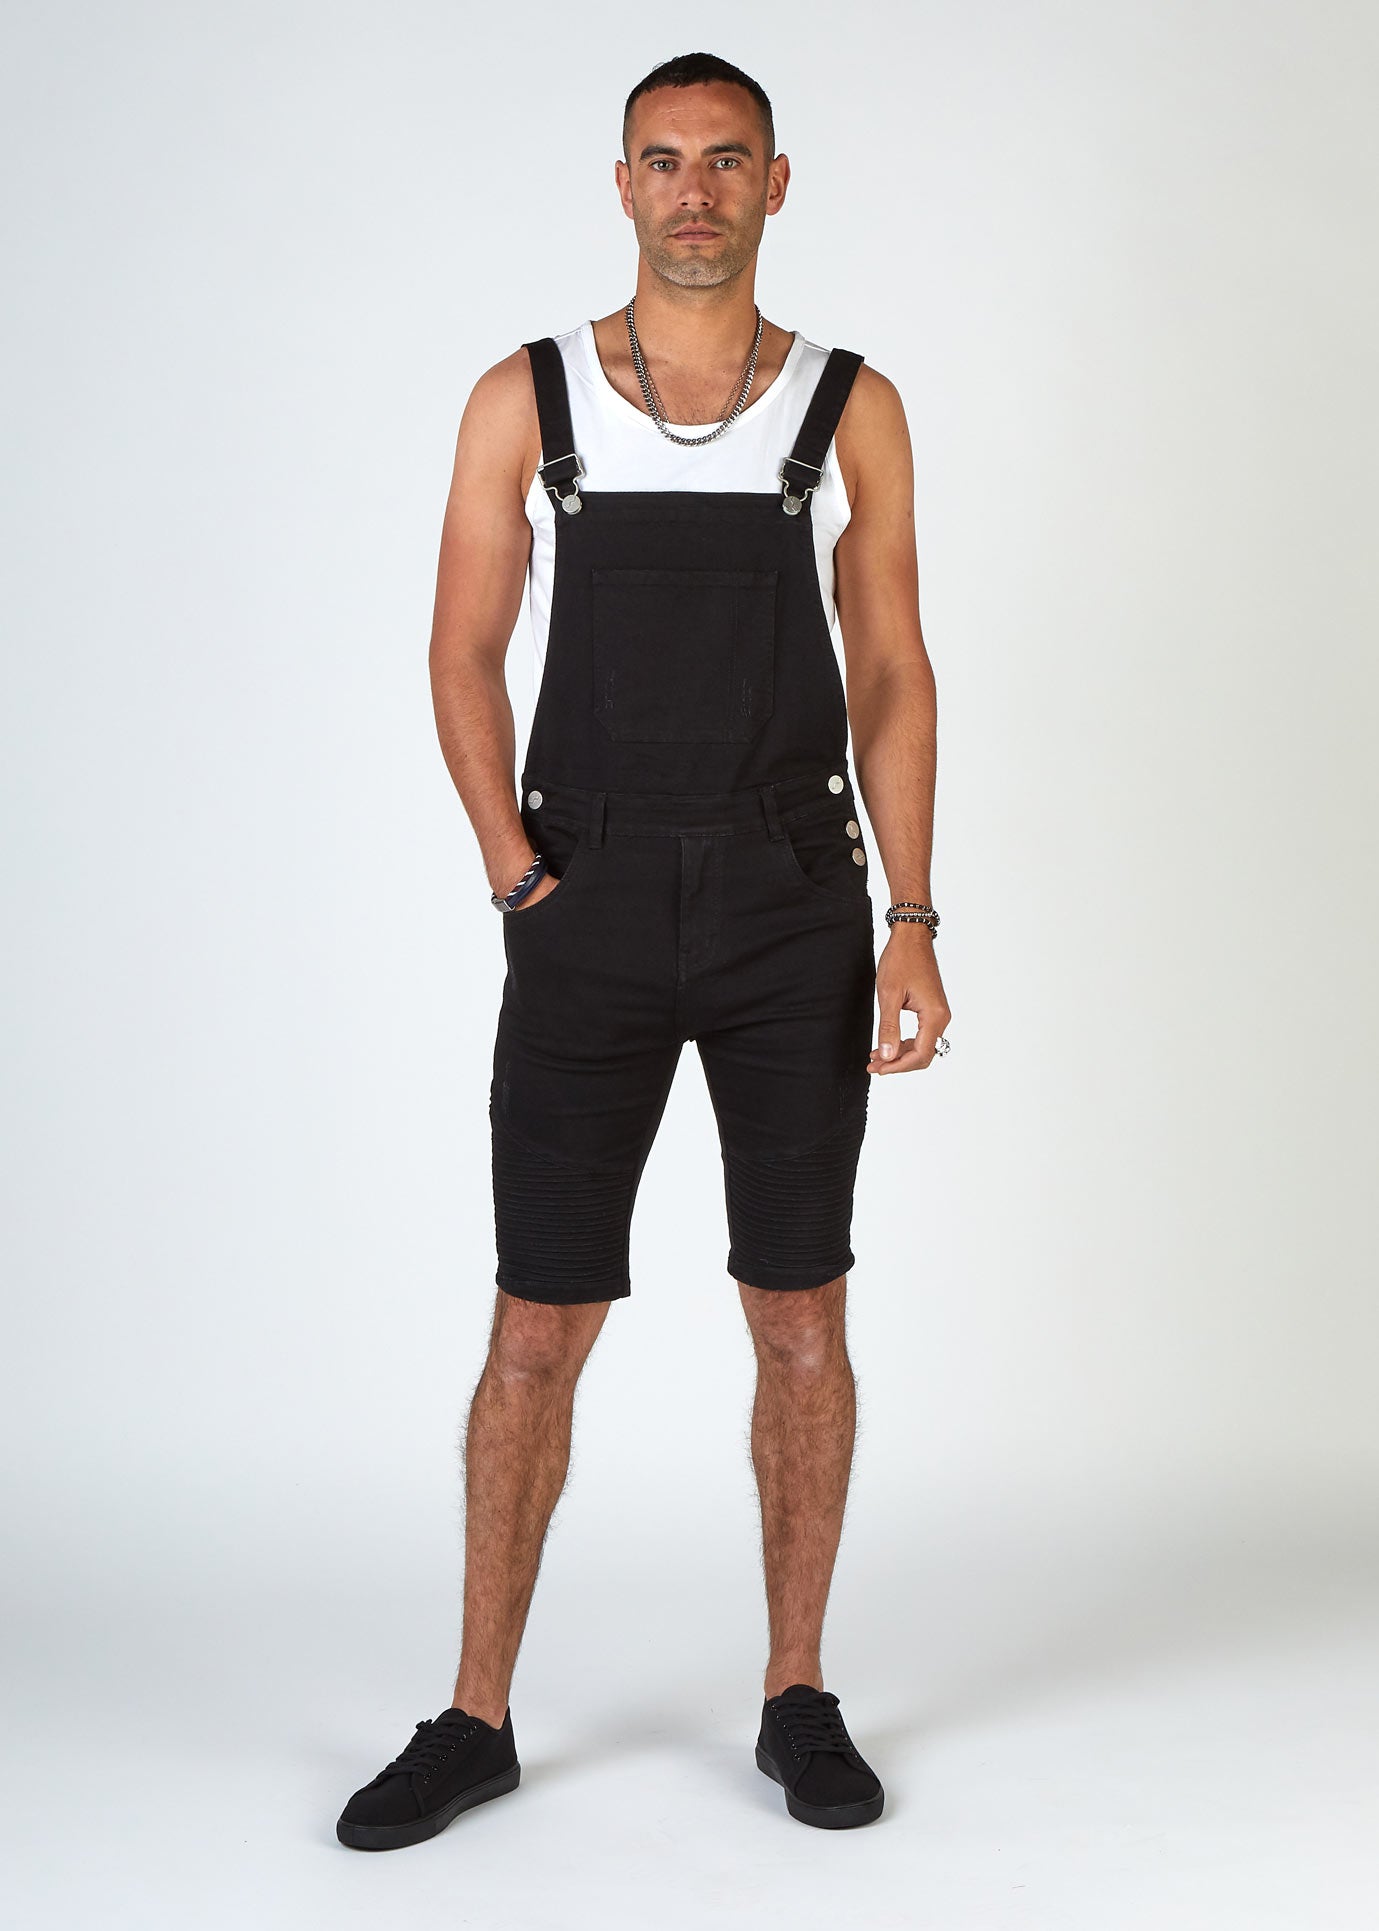 Full-length front shot with male model wearing Trafford skinny black dungaree shorts, a white vest and black trainers